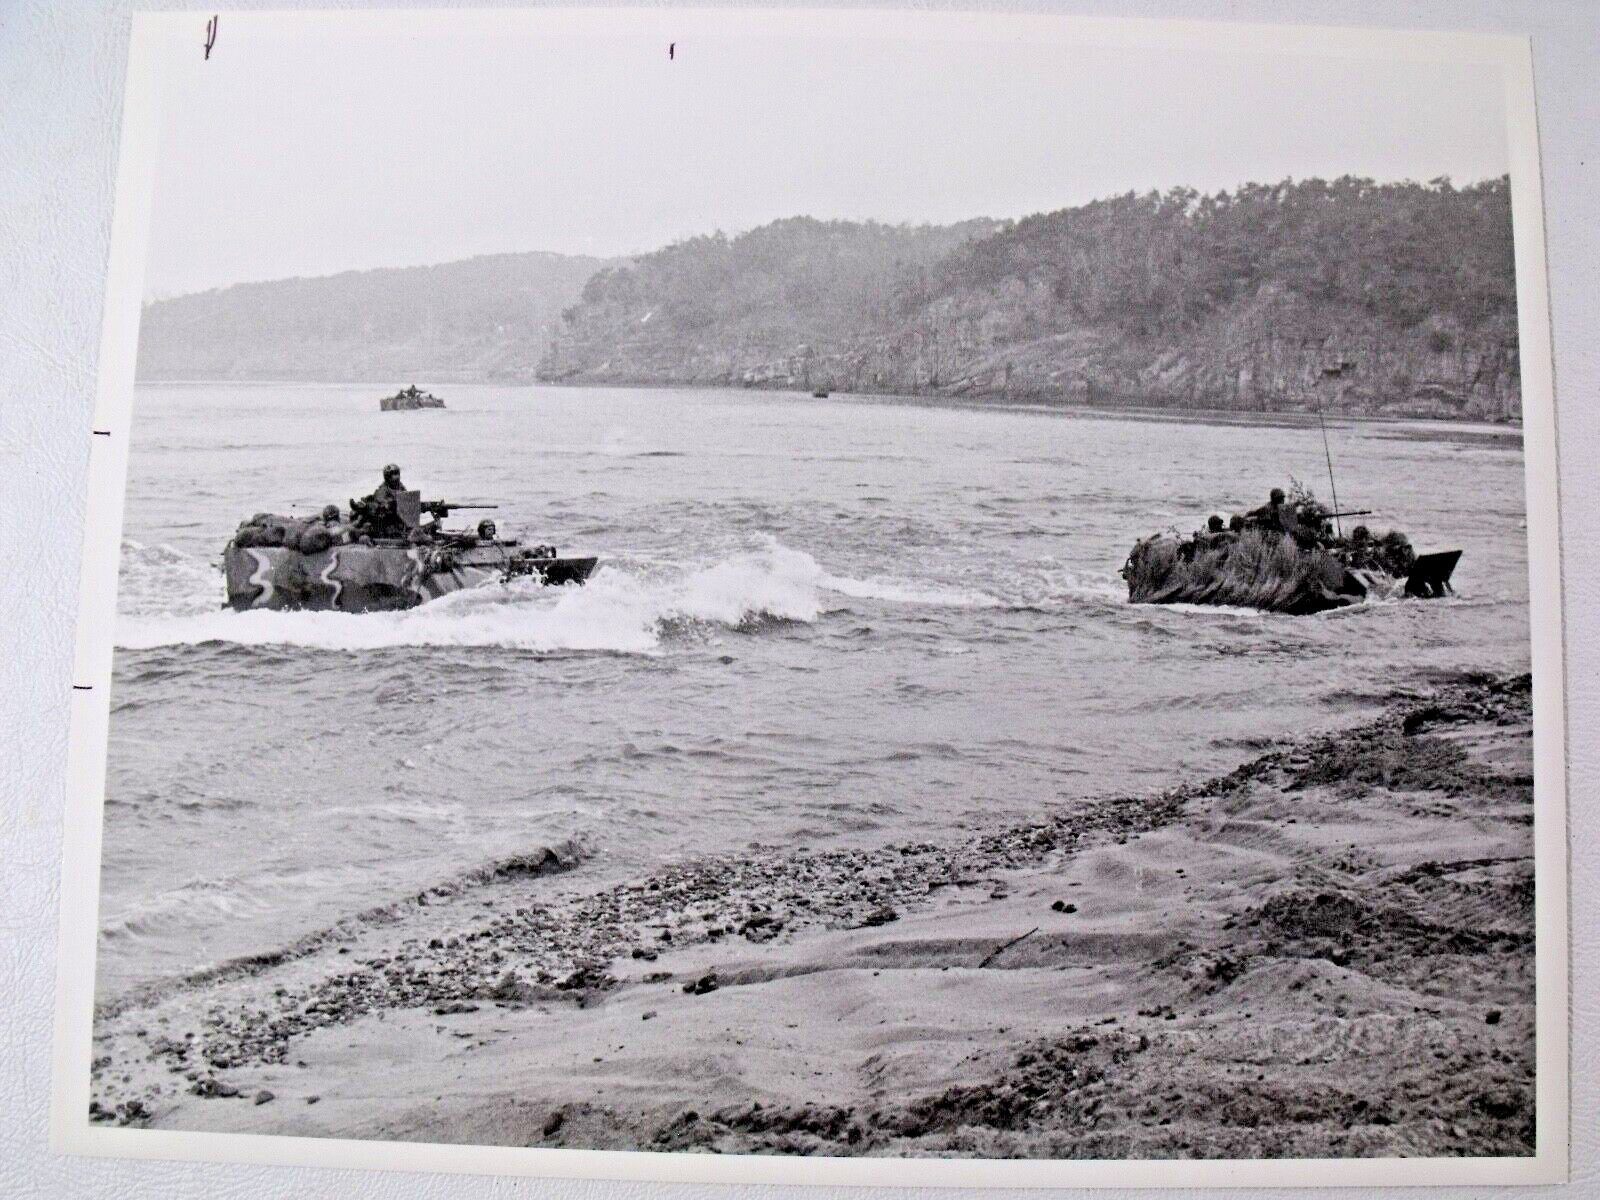 8 x 10 Military Press Photo ARMORED PERSONNEL CARRIERS LANDING ON BEACH 1980